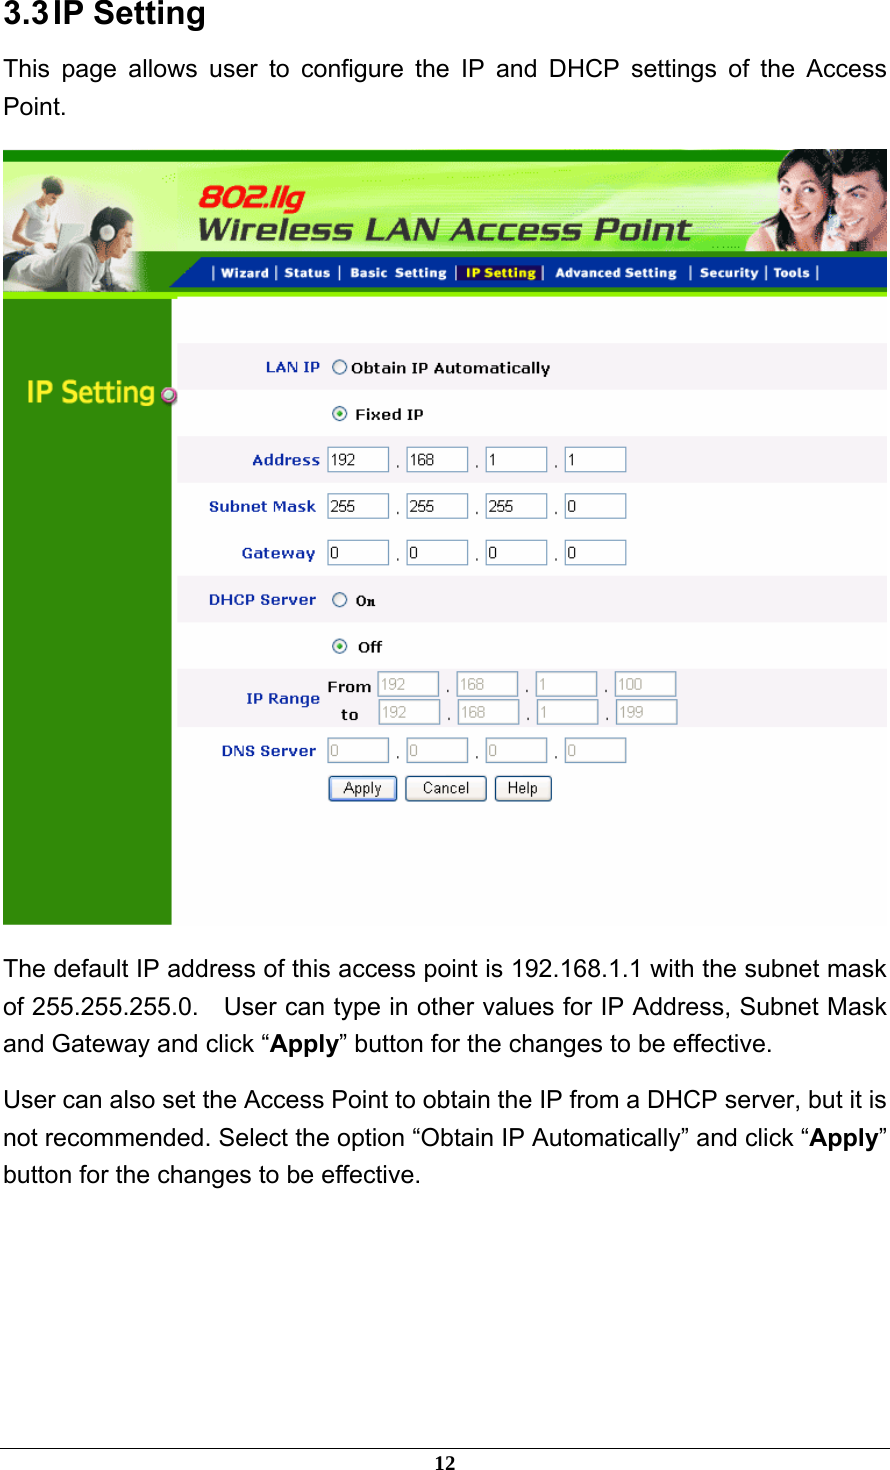 3.3 IP  Setting This page allows user to configure the IP and DHCP settings of the Access Point.  The default IP address of this access point is 192.168.1.1 with the subnet mask of 255.255.255.0.  User can type in other values for IP Address, Subnet Mask and Gateway and click “Apply” button for the changes to be effective.   User can also set the Access Point to obtain the IP from a DHCP server, but it is not recommended. Select the option “Obtain IP Automatically” and click “Apply” button for the changes to be effective.     12 